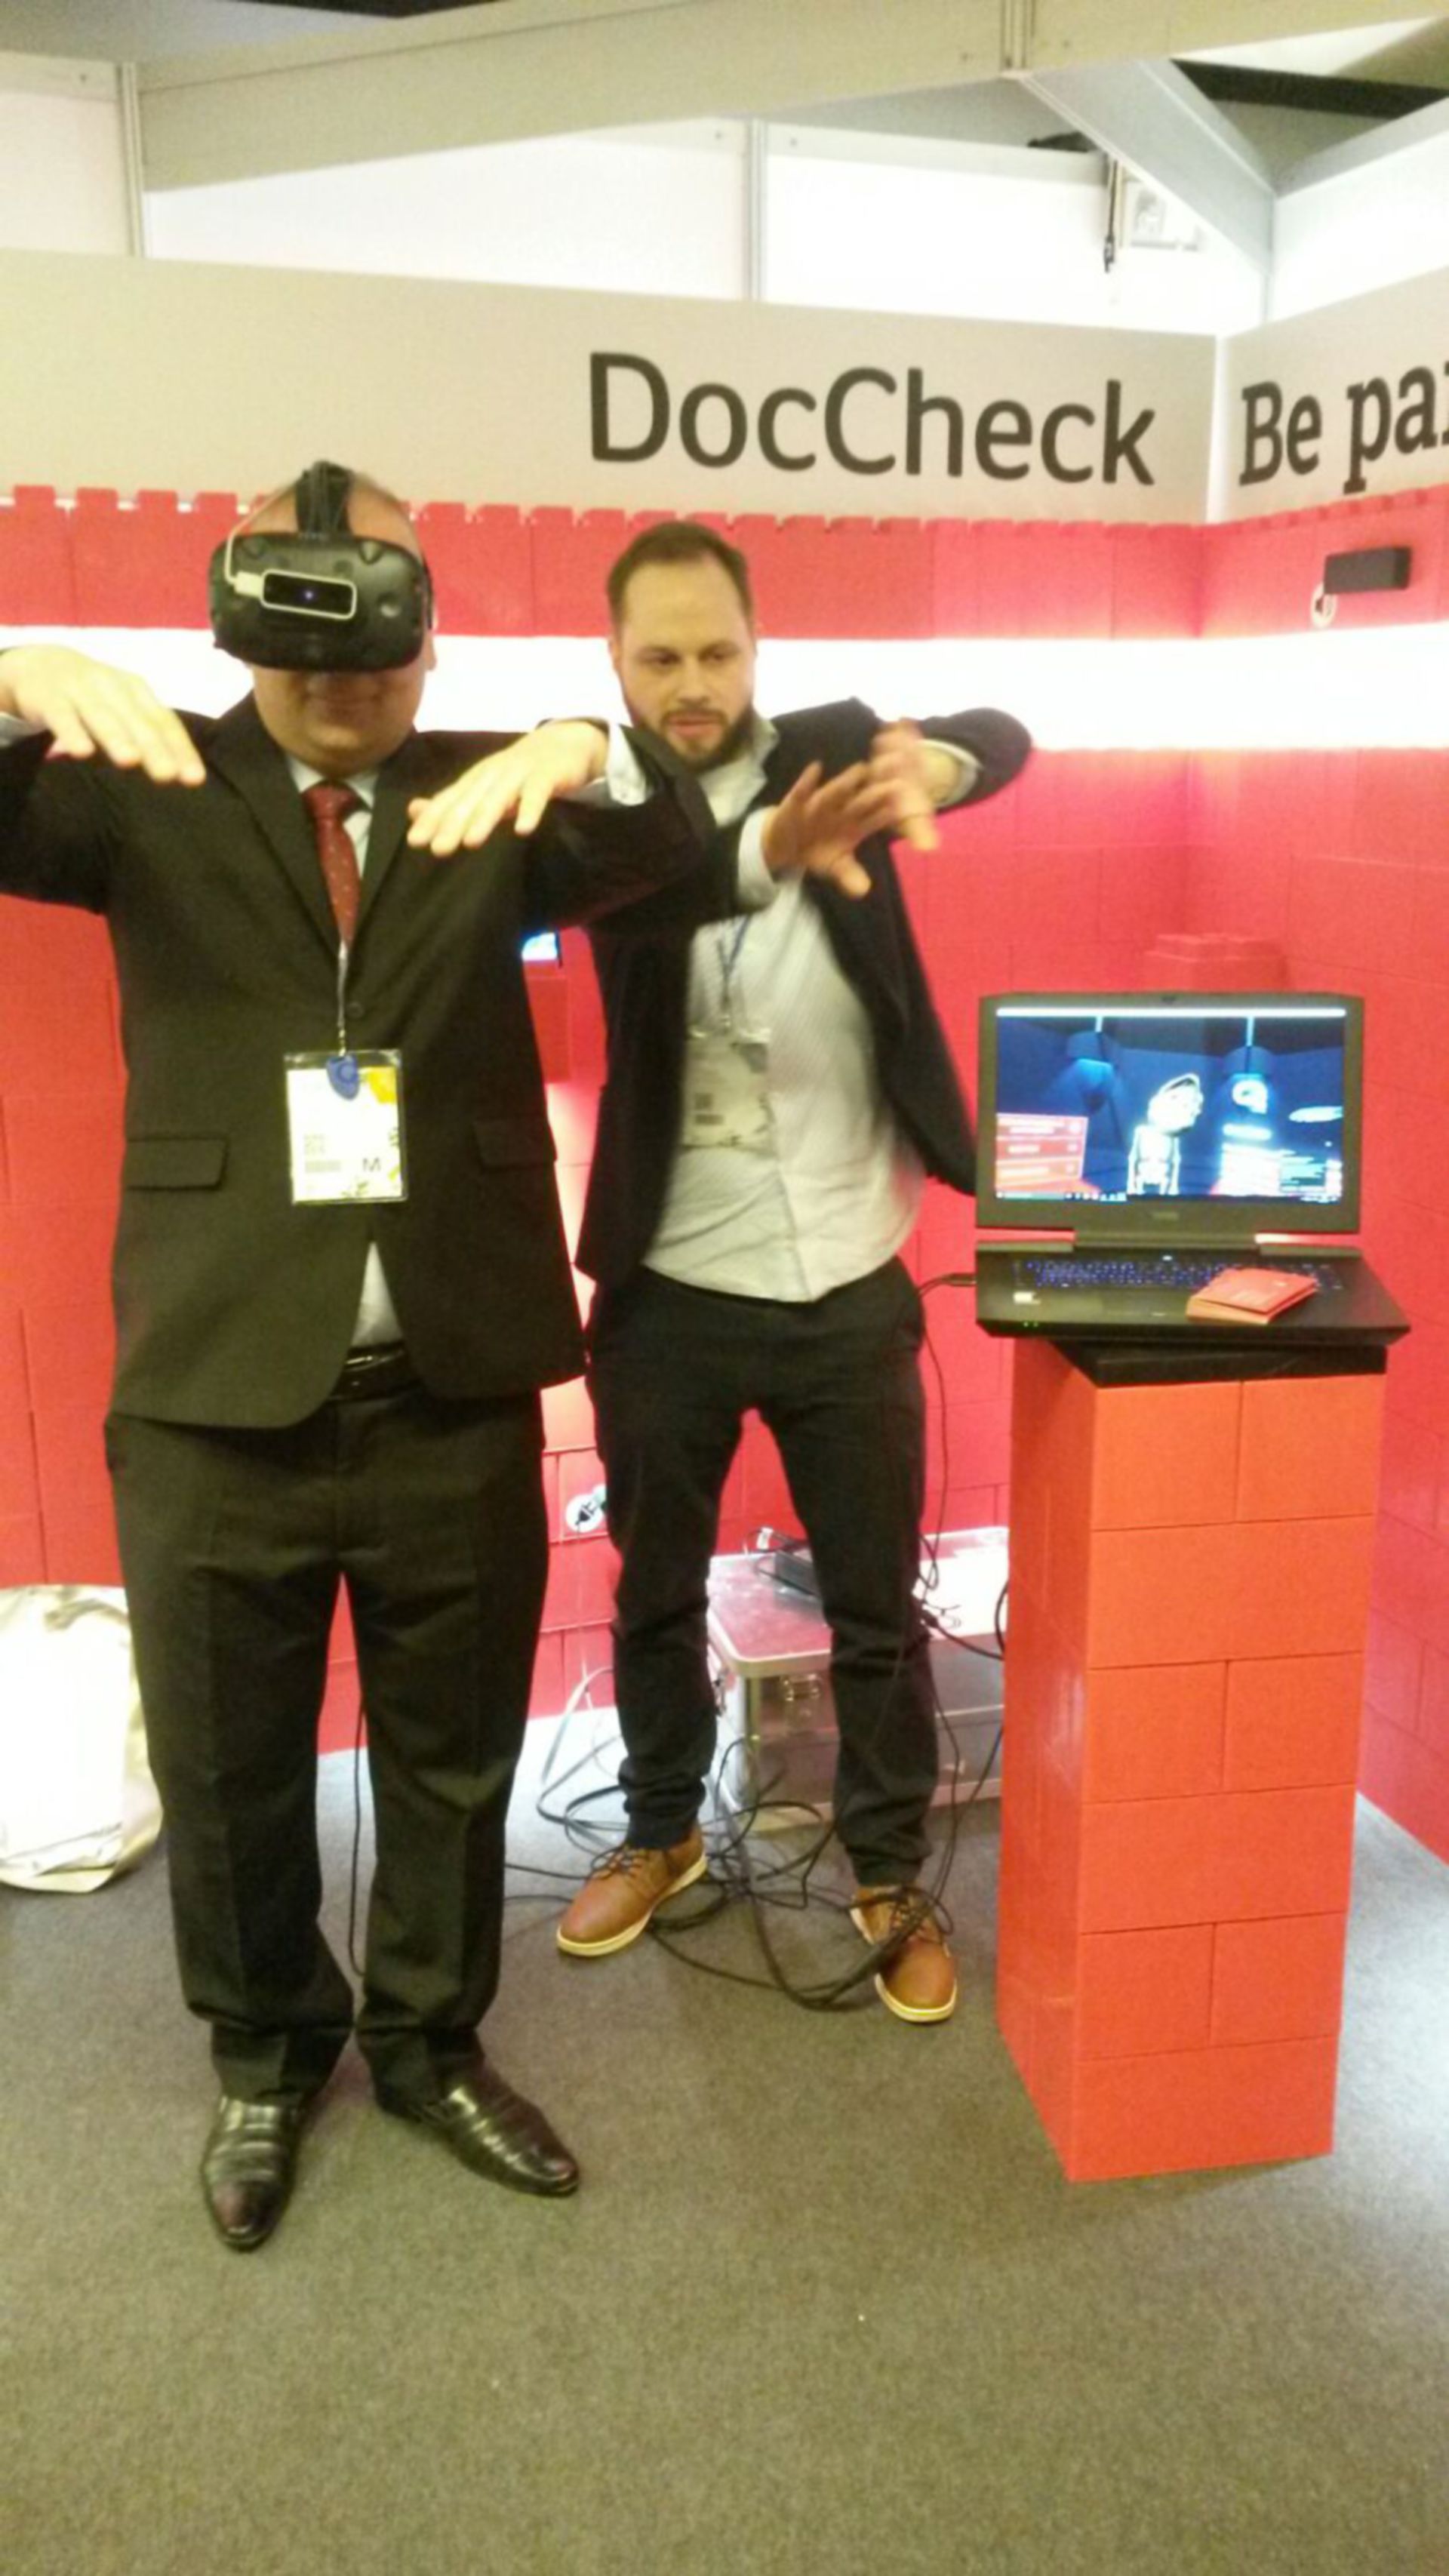 Testing our virtual reality headset at the DocCheck booth